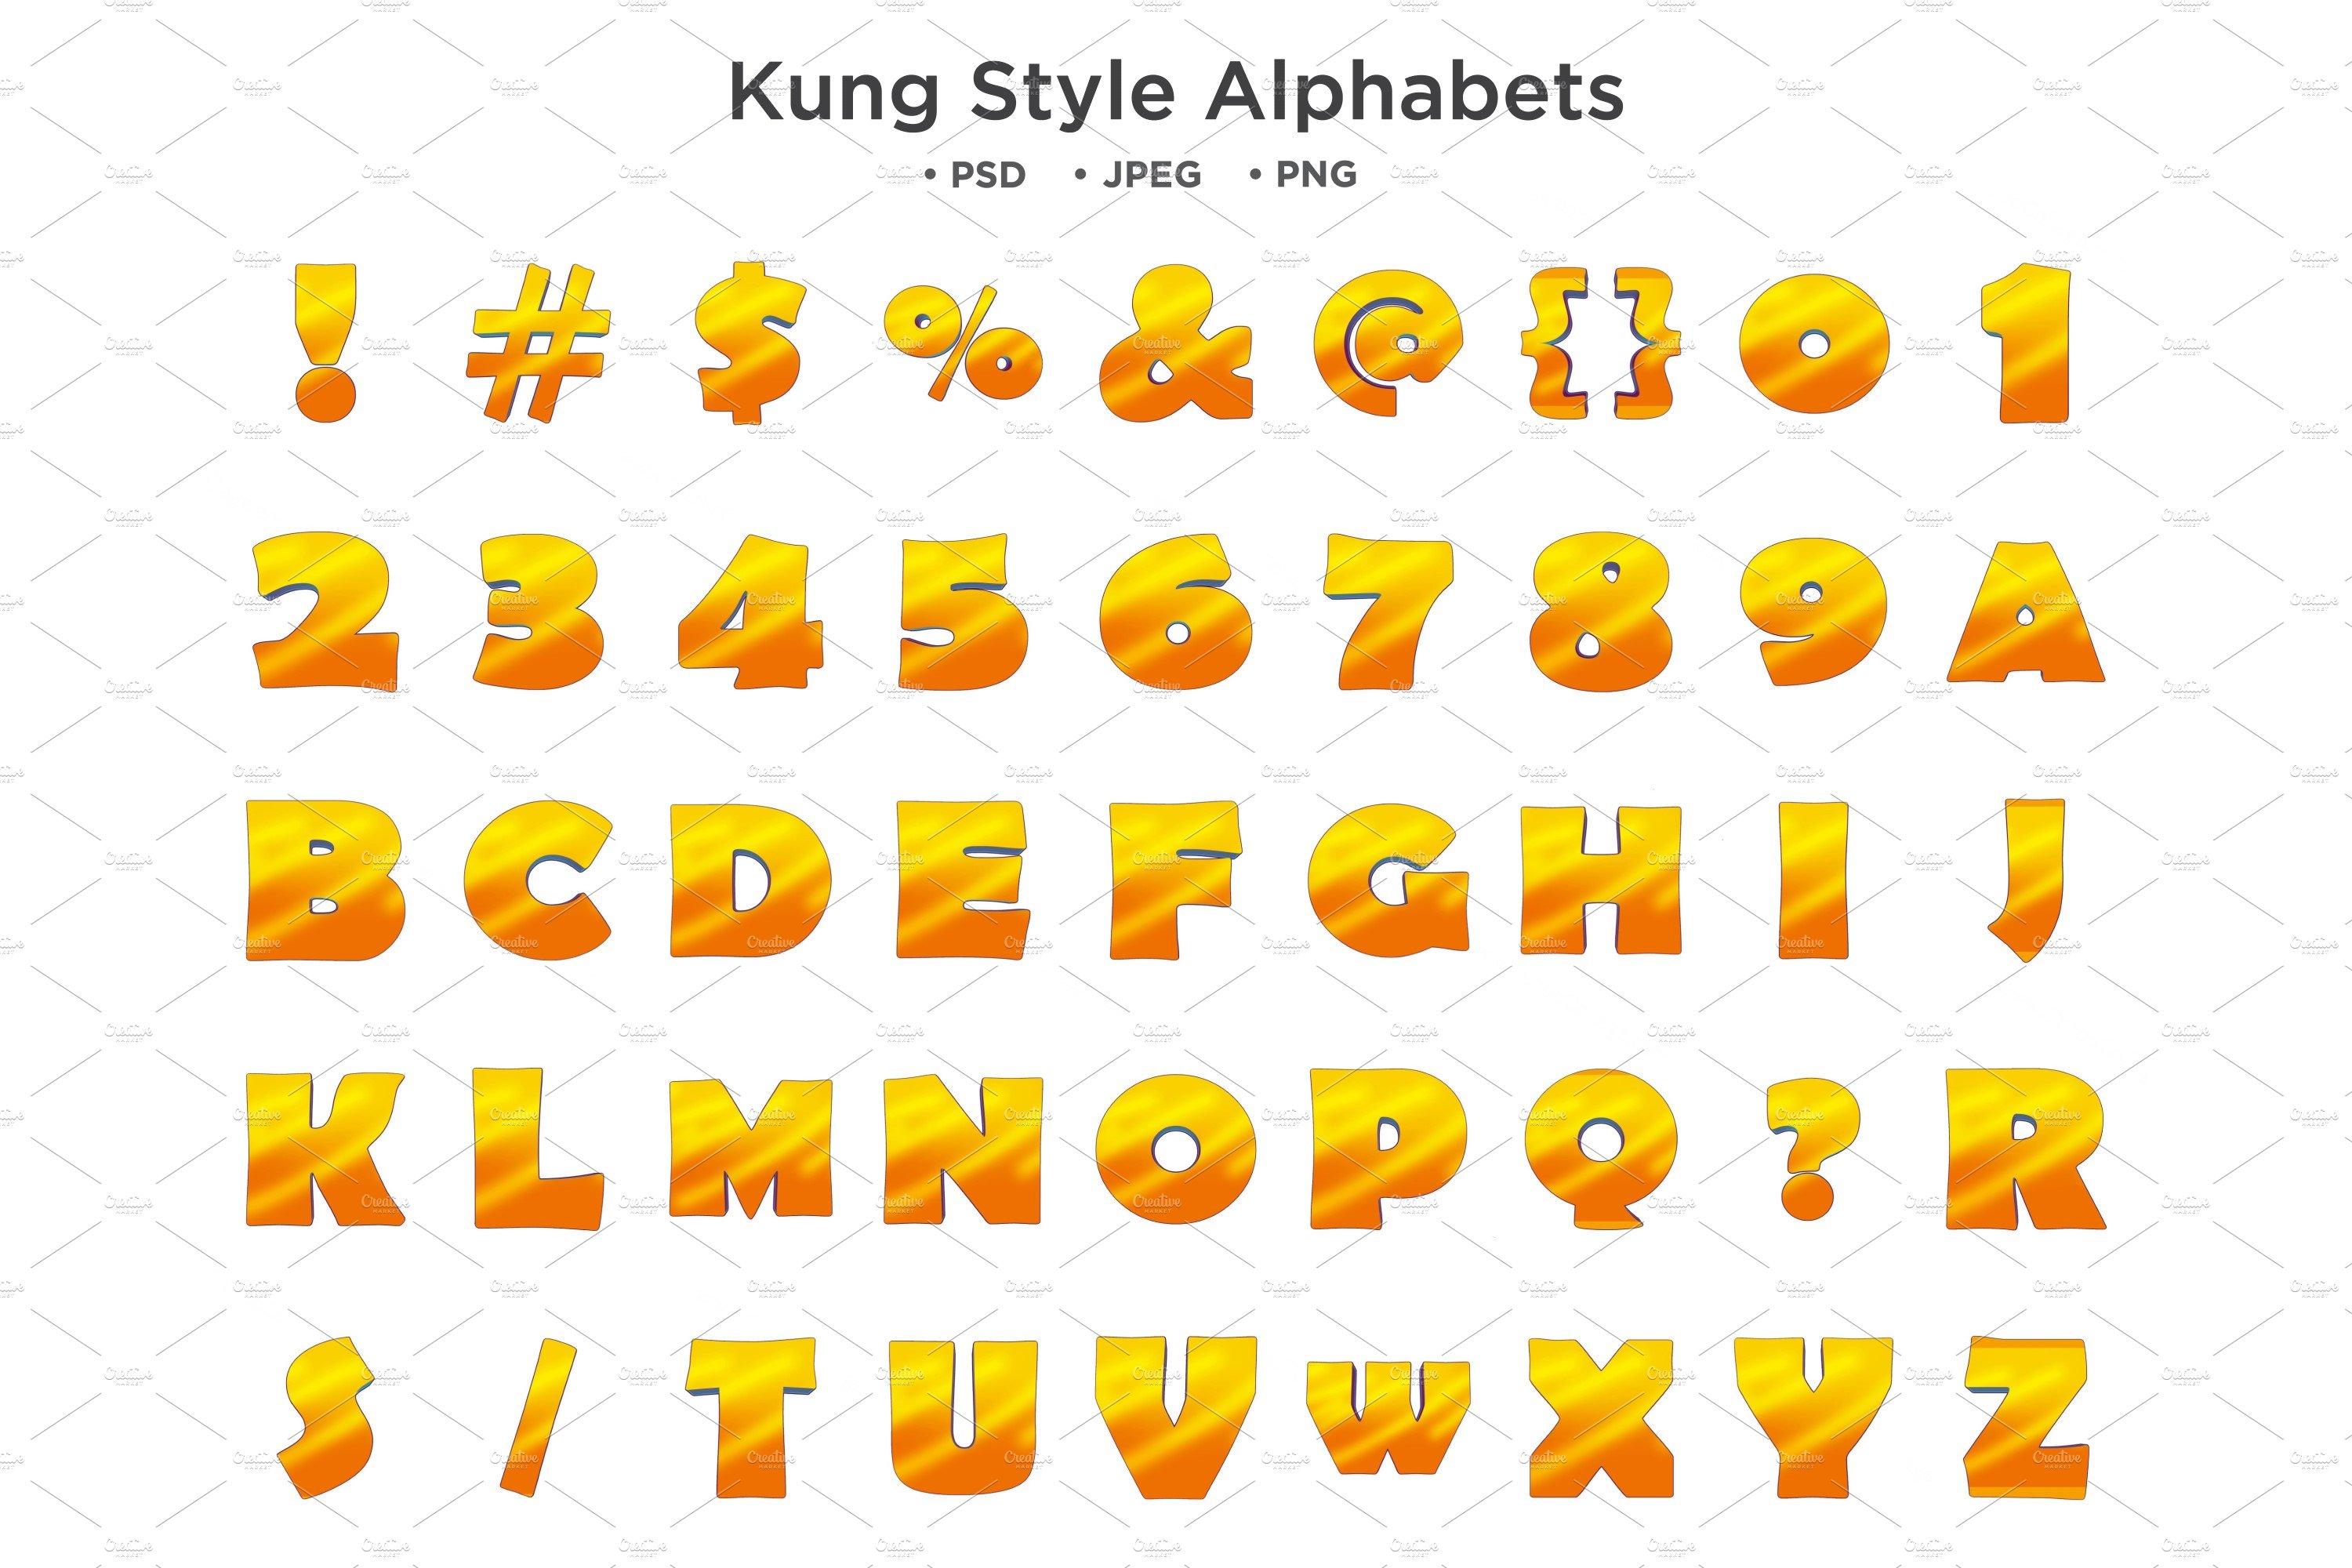 KUNG Style Alphabet Typographycover image.